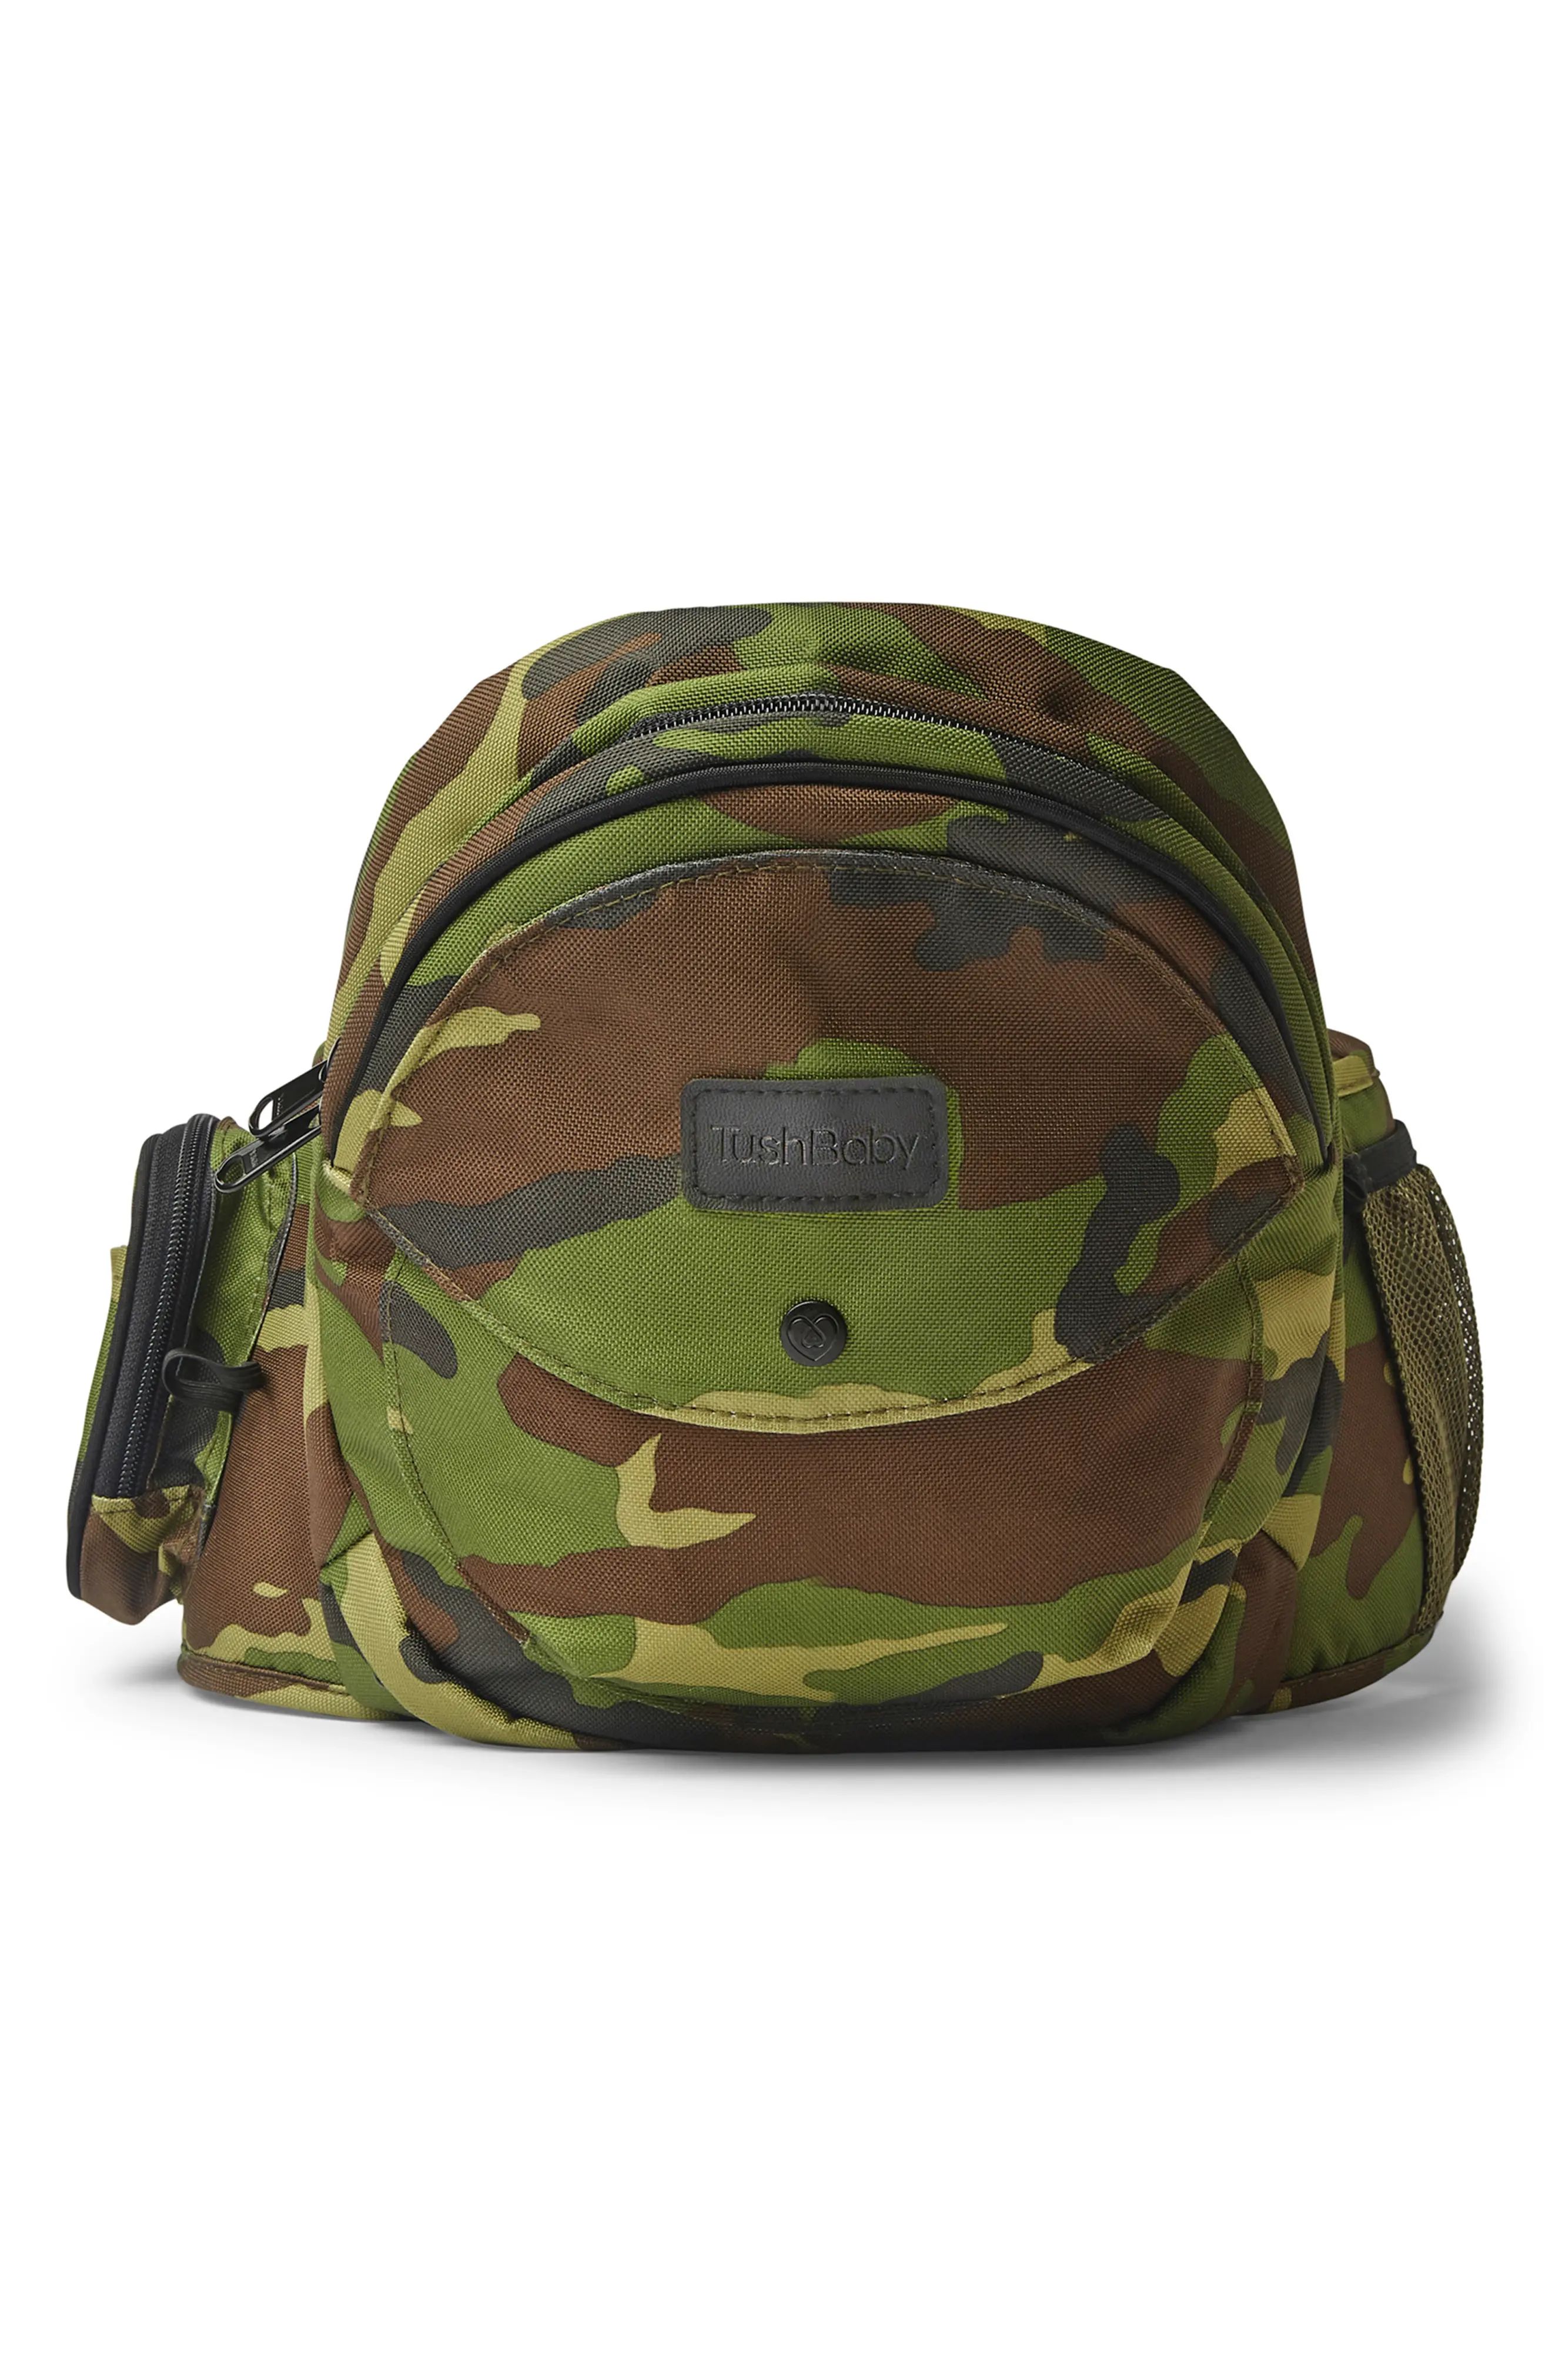 TushBaby Hip Seat Carrier in Camo at Nordstrom | Nordstrom